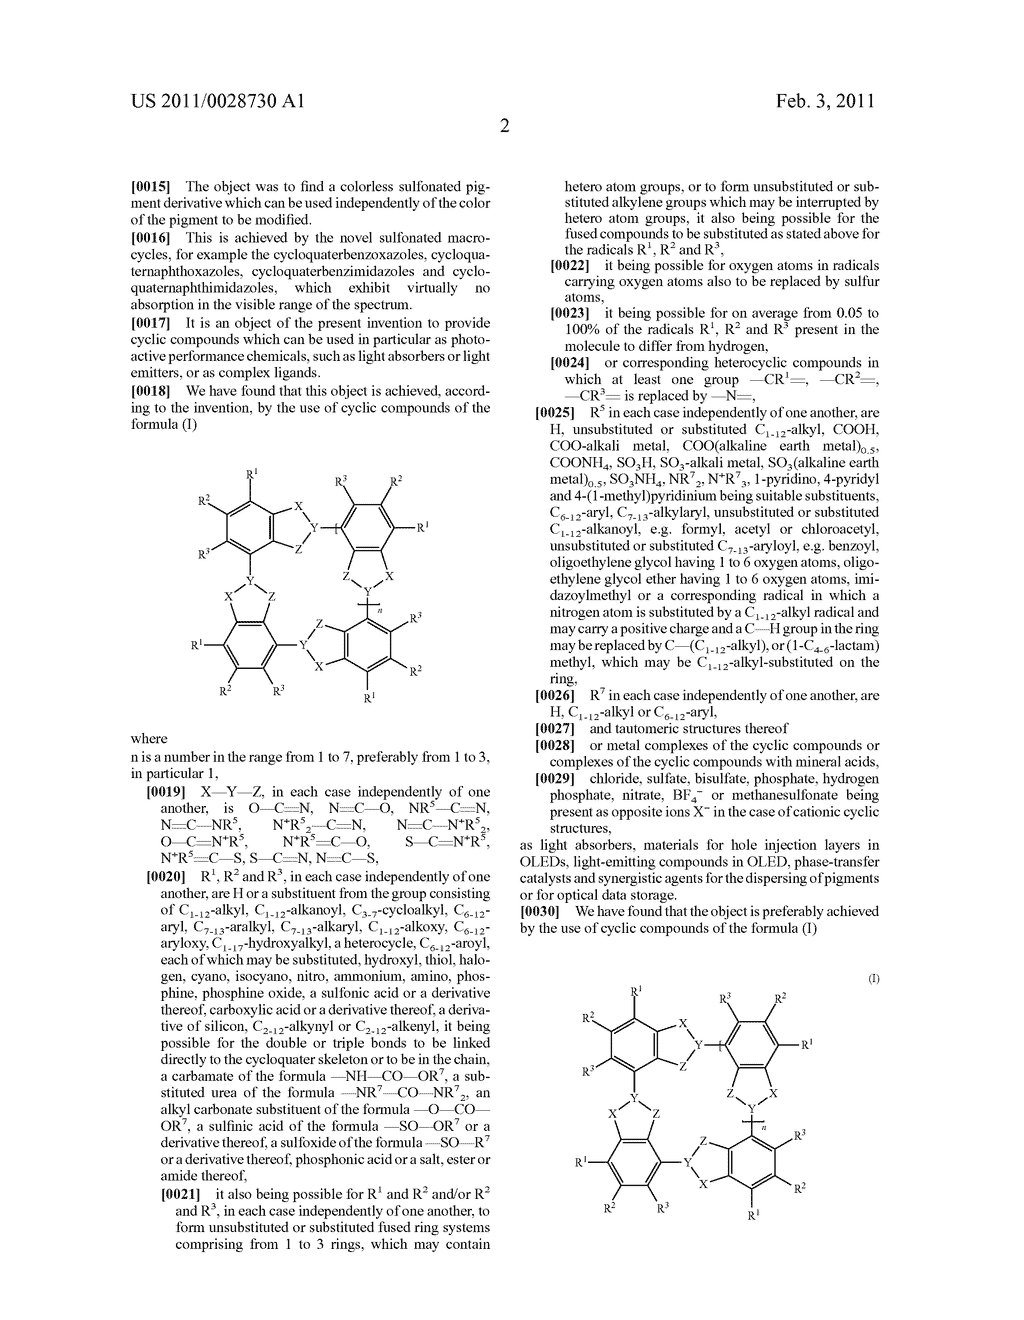 CYCLIC COMPOUNDS AND THE USE THEREOF AS LIGHT ABSORBERS, LIGHT EMITTERS, OR COMPLEX LIGANDS - diagram, schematic, and image 03